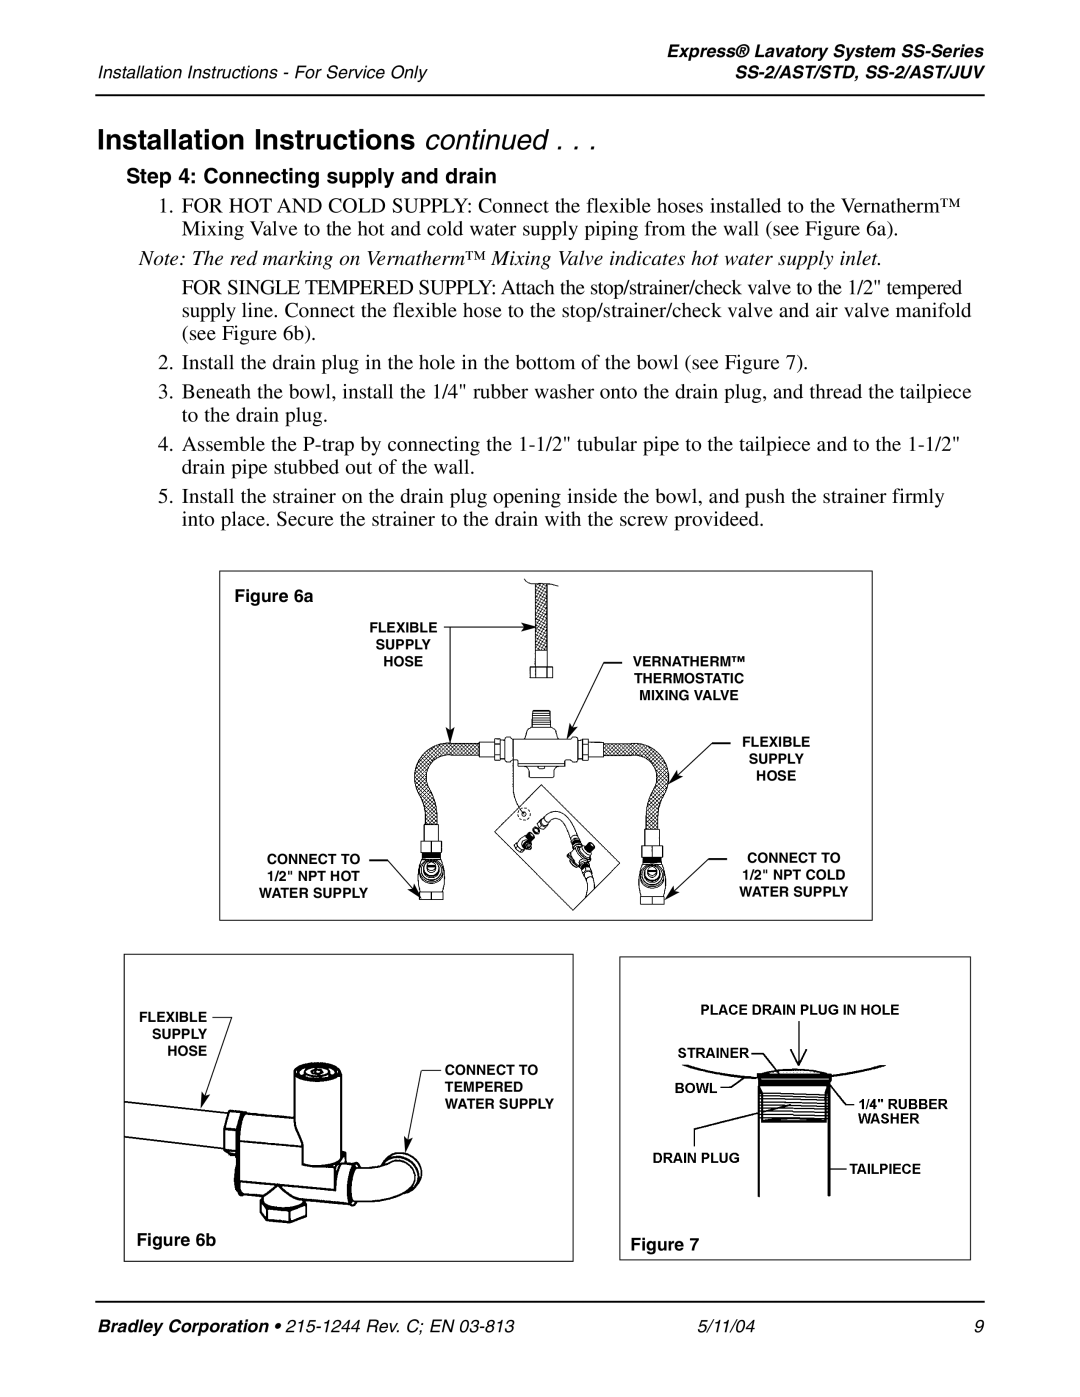 Bradley Smoker SS-2/AST/JUV, SS-2/AST/STD installation instructions Connecting supply and drain 